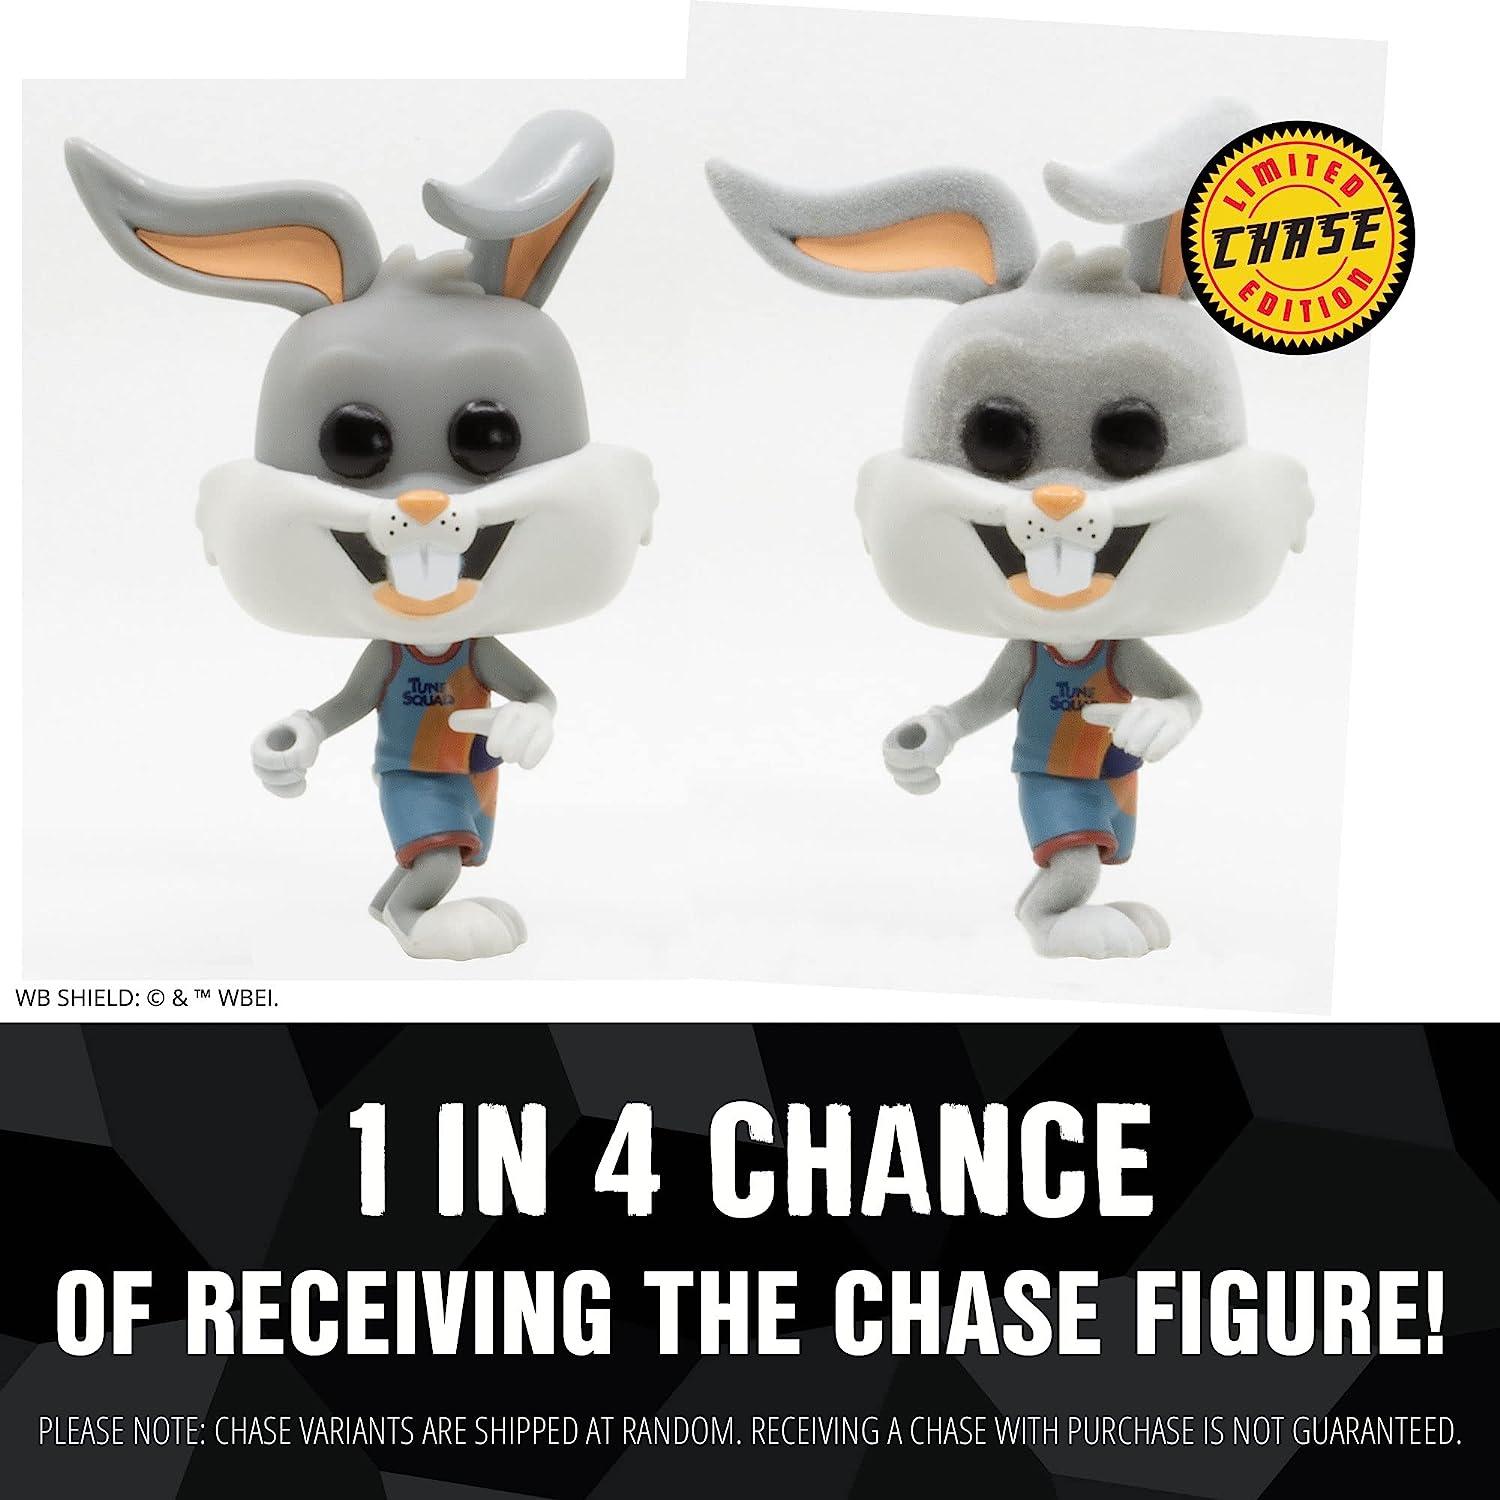 Funko Pop Funkoverse: Space Jam 2: A New Legacy 100 2-Pack, Lebron James and Bugs Bunny (Styles May Vary) - BumbleToys - 18+, Action Figures, Boys, Funko, Marvel, Pre-Order, Spiderman